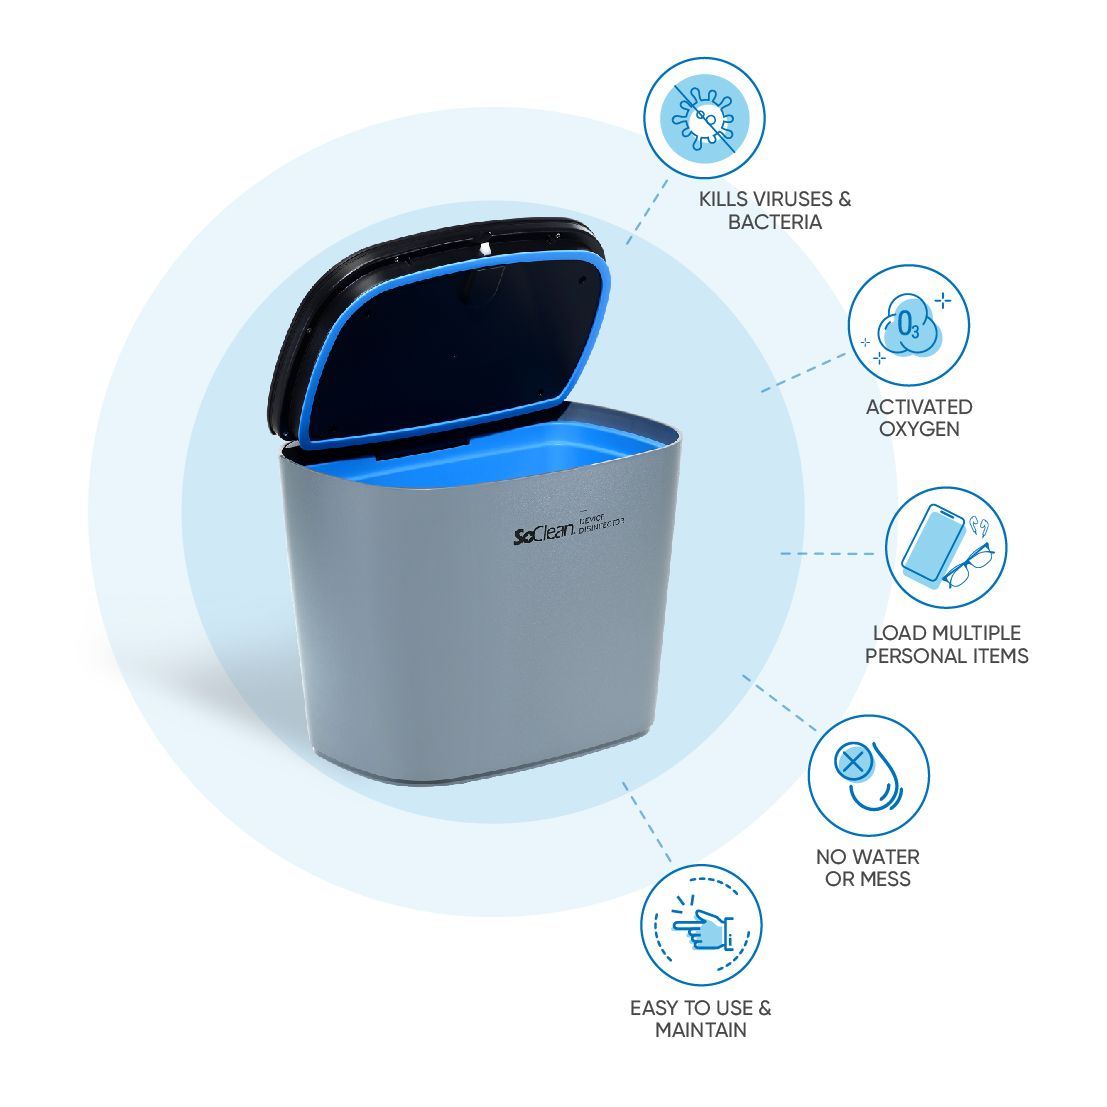 SoClean Device Disinfector for Smartphones and More | Kills 99.9% of Viruses and Bacteria